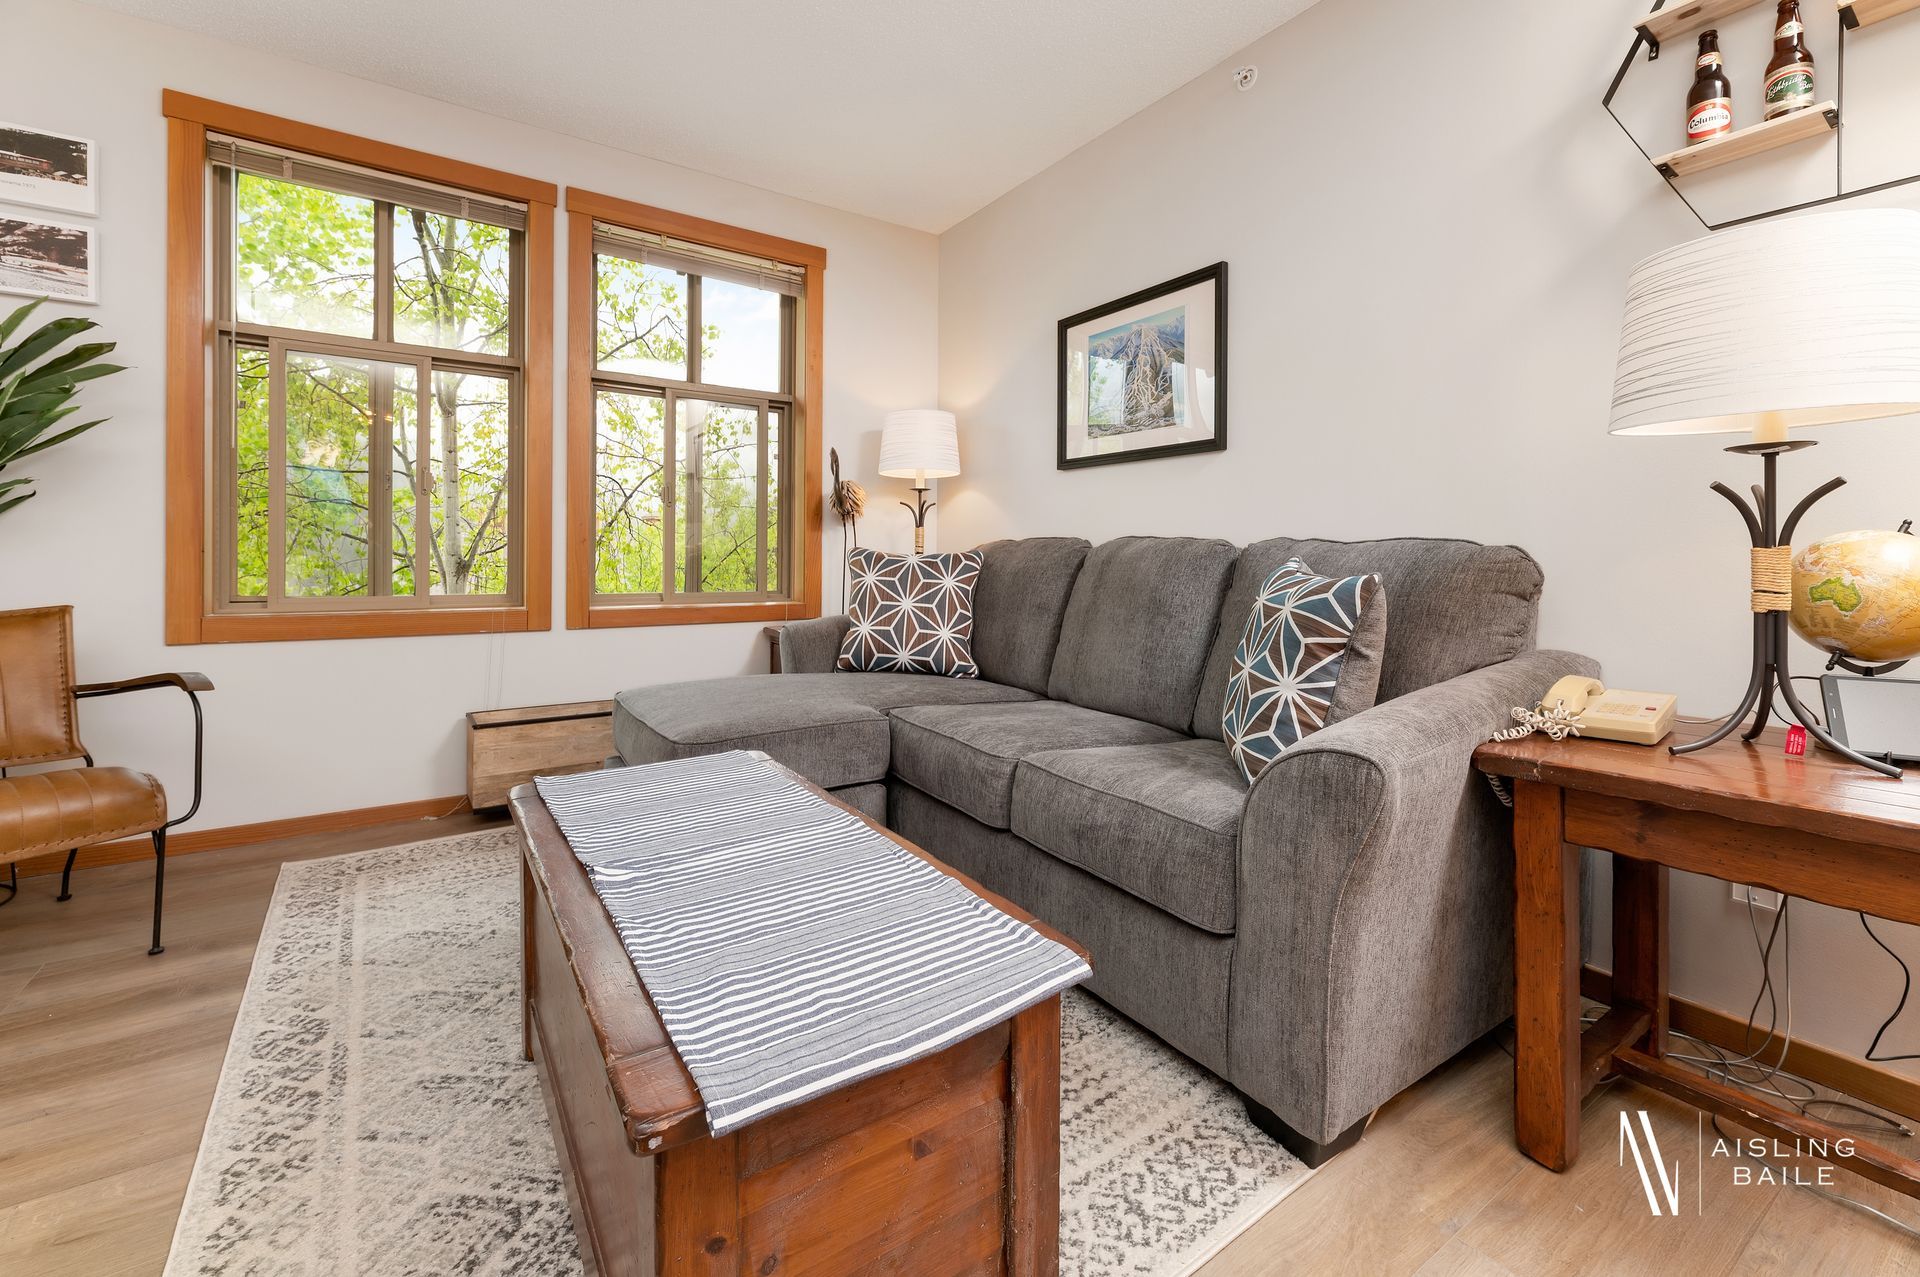 Living room sectional of the Upper Tip, a Panorama BC Vacation Rental hosted by Aisling Baile Property Management.